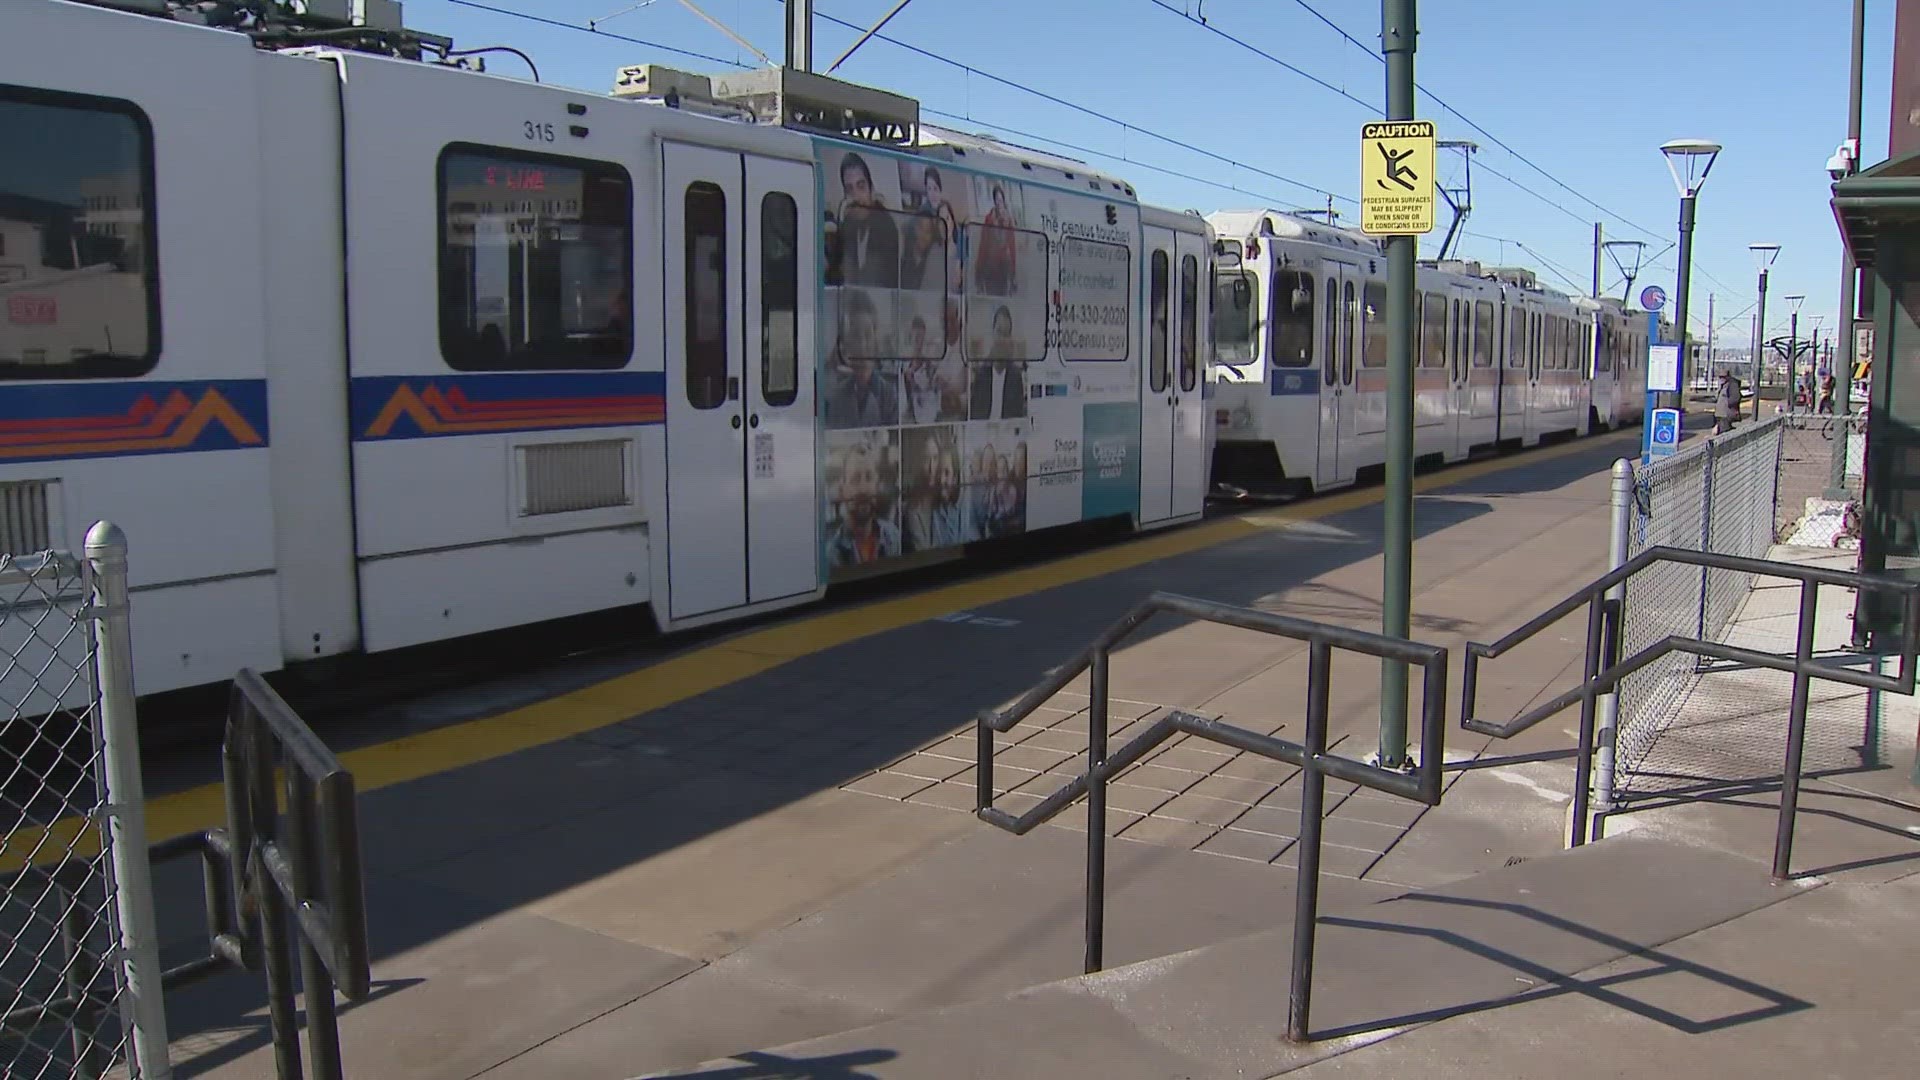 RTD will be adding train cars to accommodate more riders before and after the concerts.